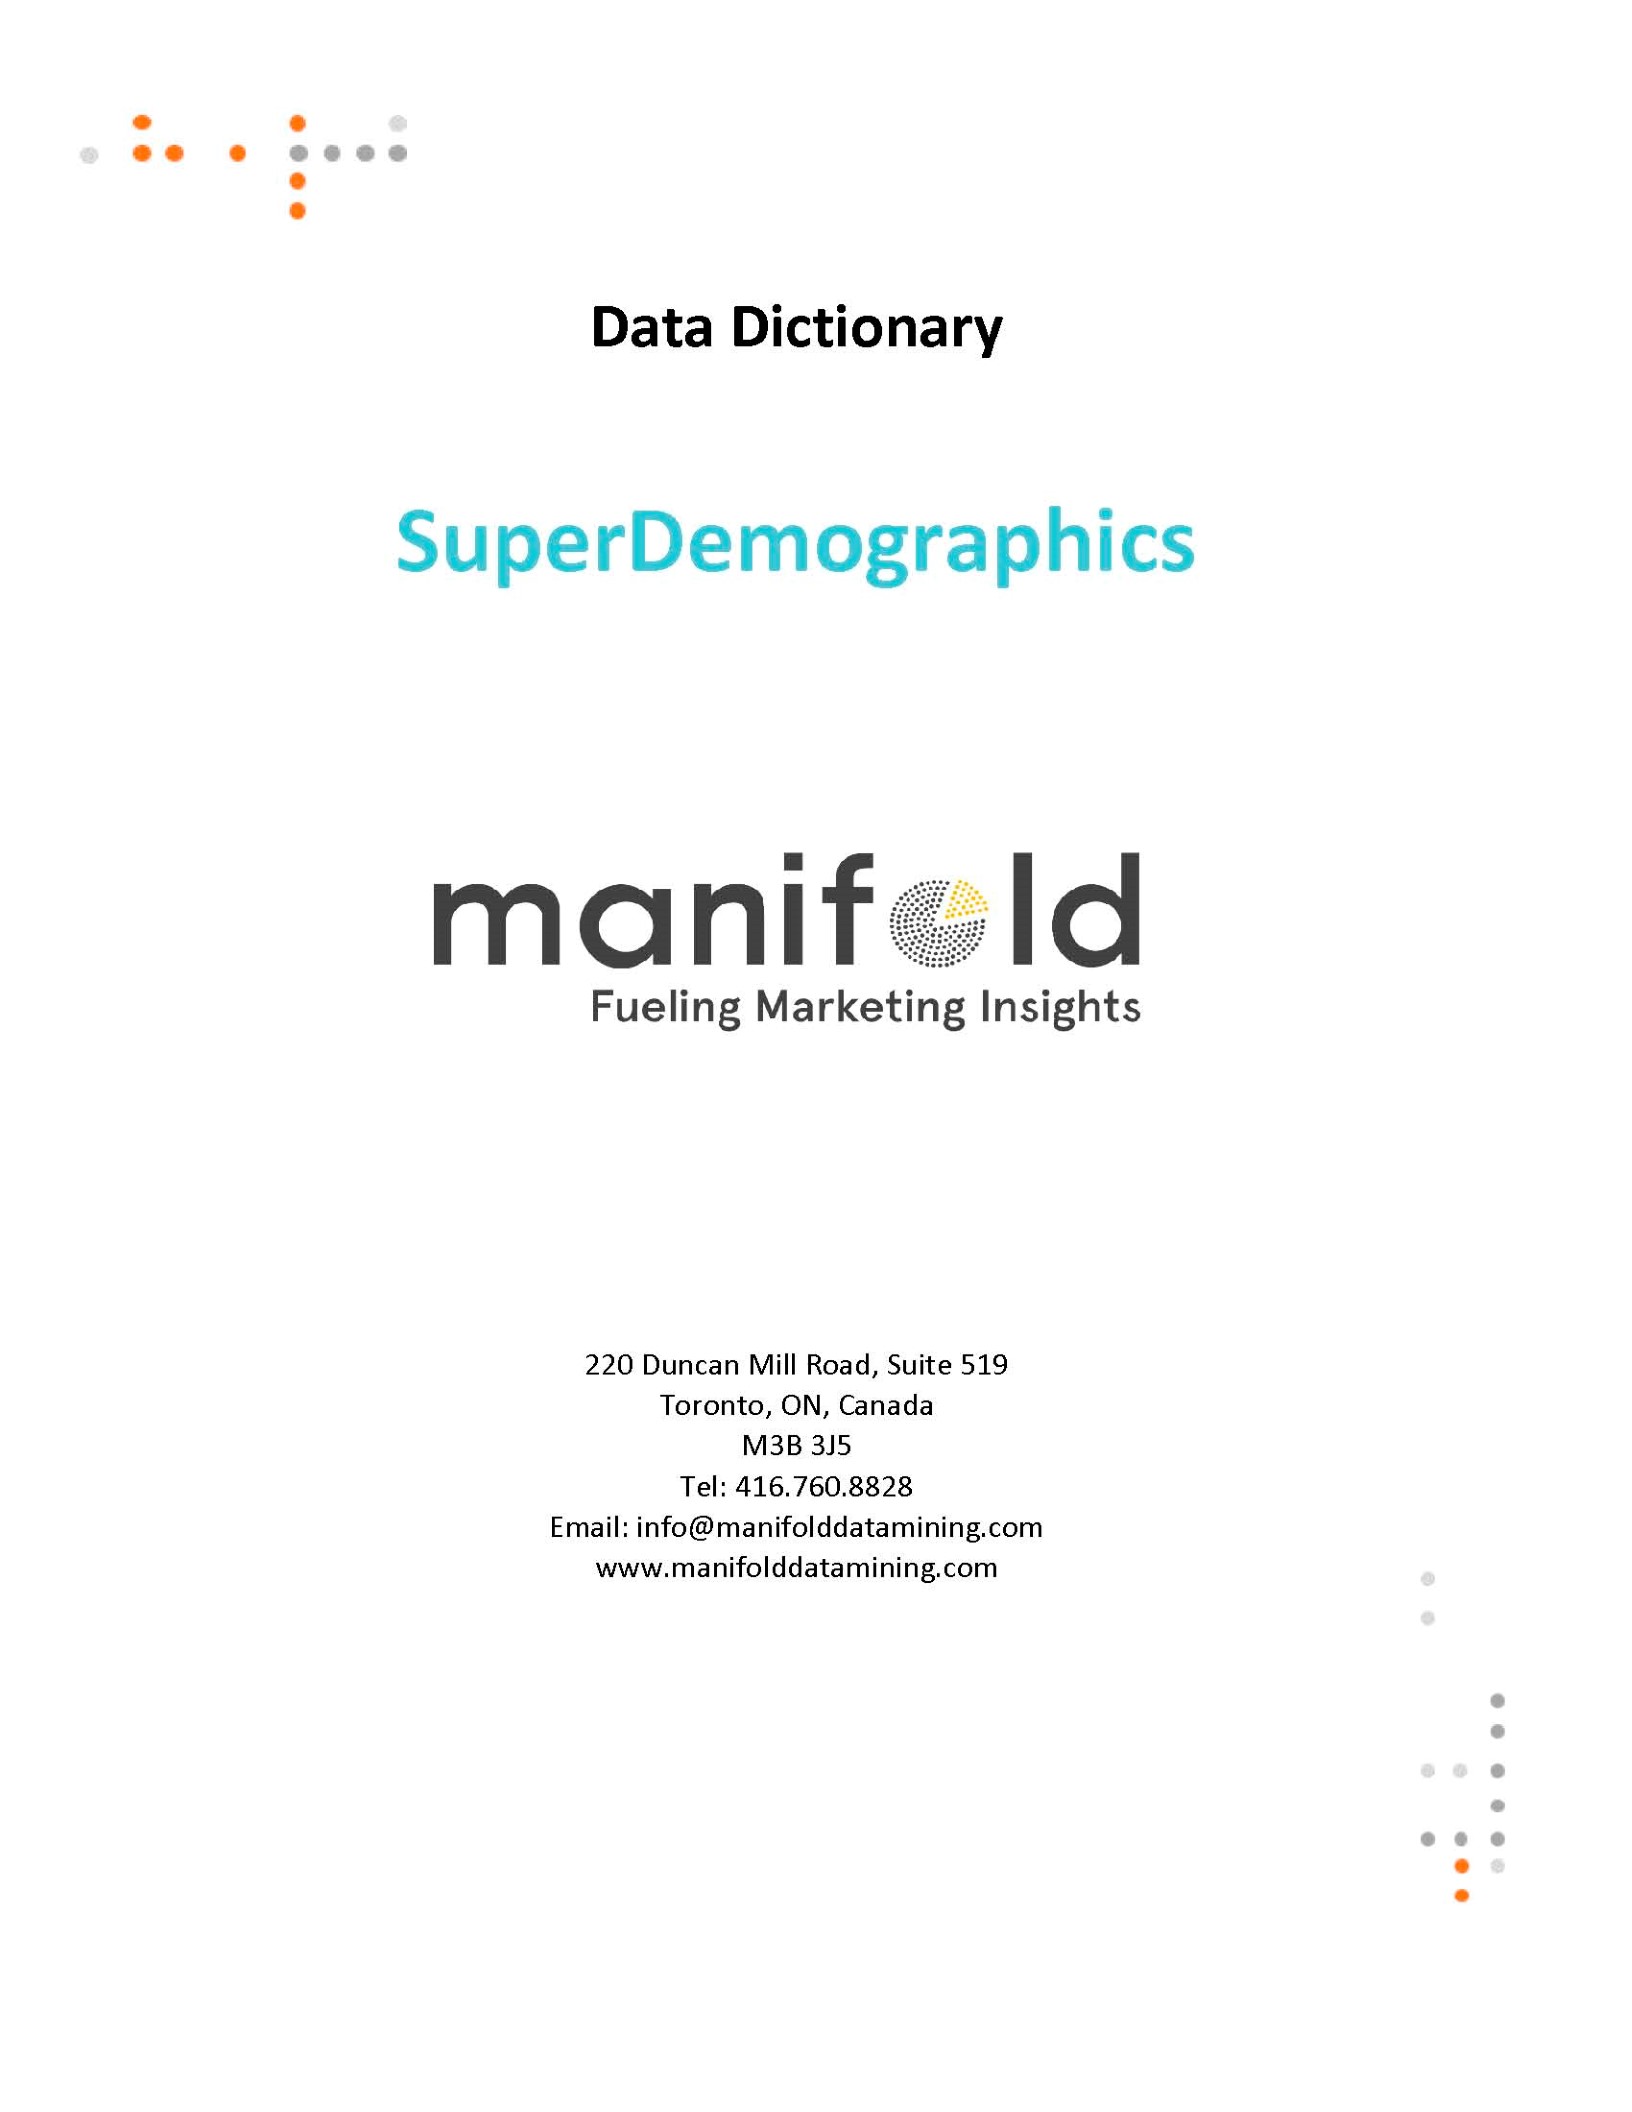 Data Dictionary SuperDemographics_Page_001